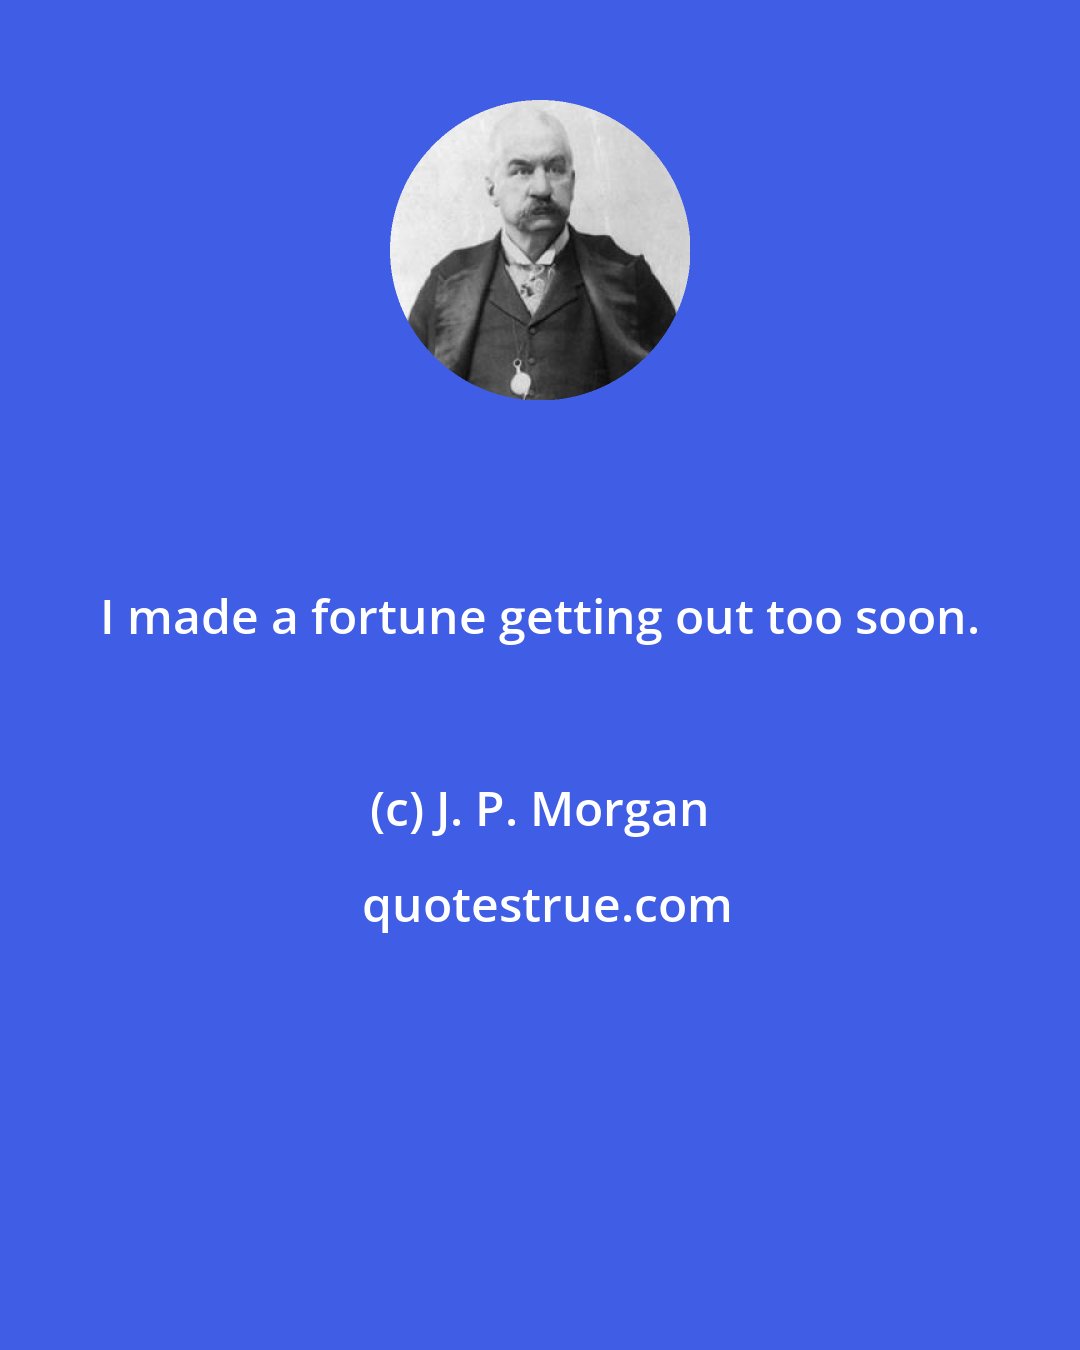 J. P. Morgan: I made a fortune getting out too soon.